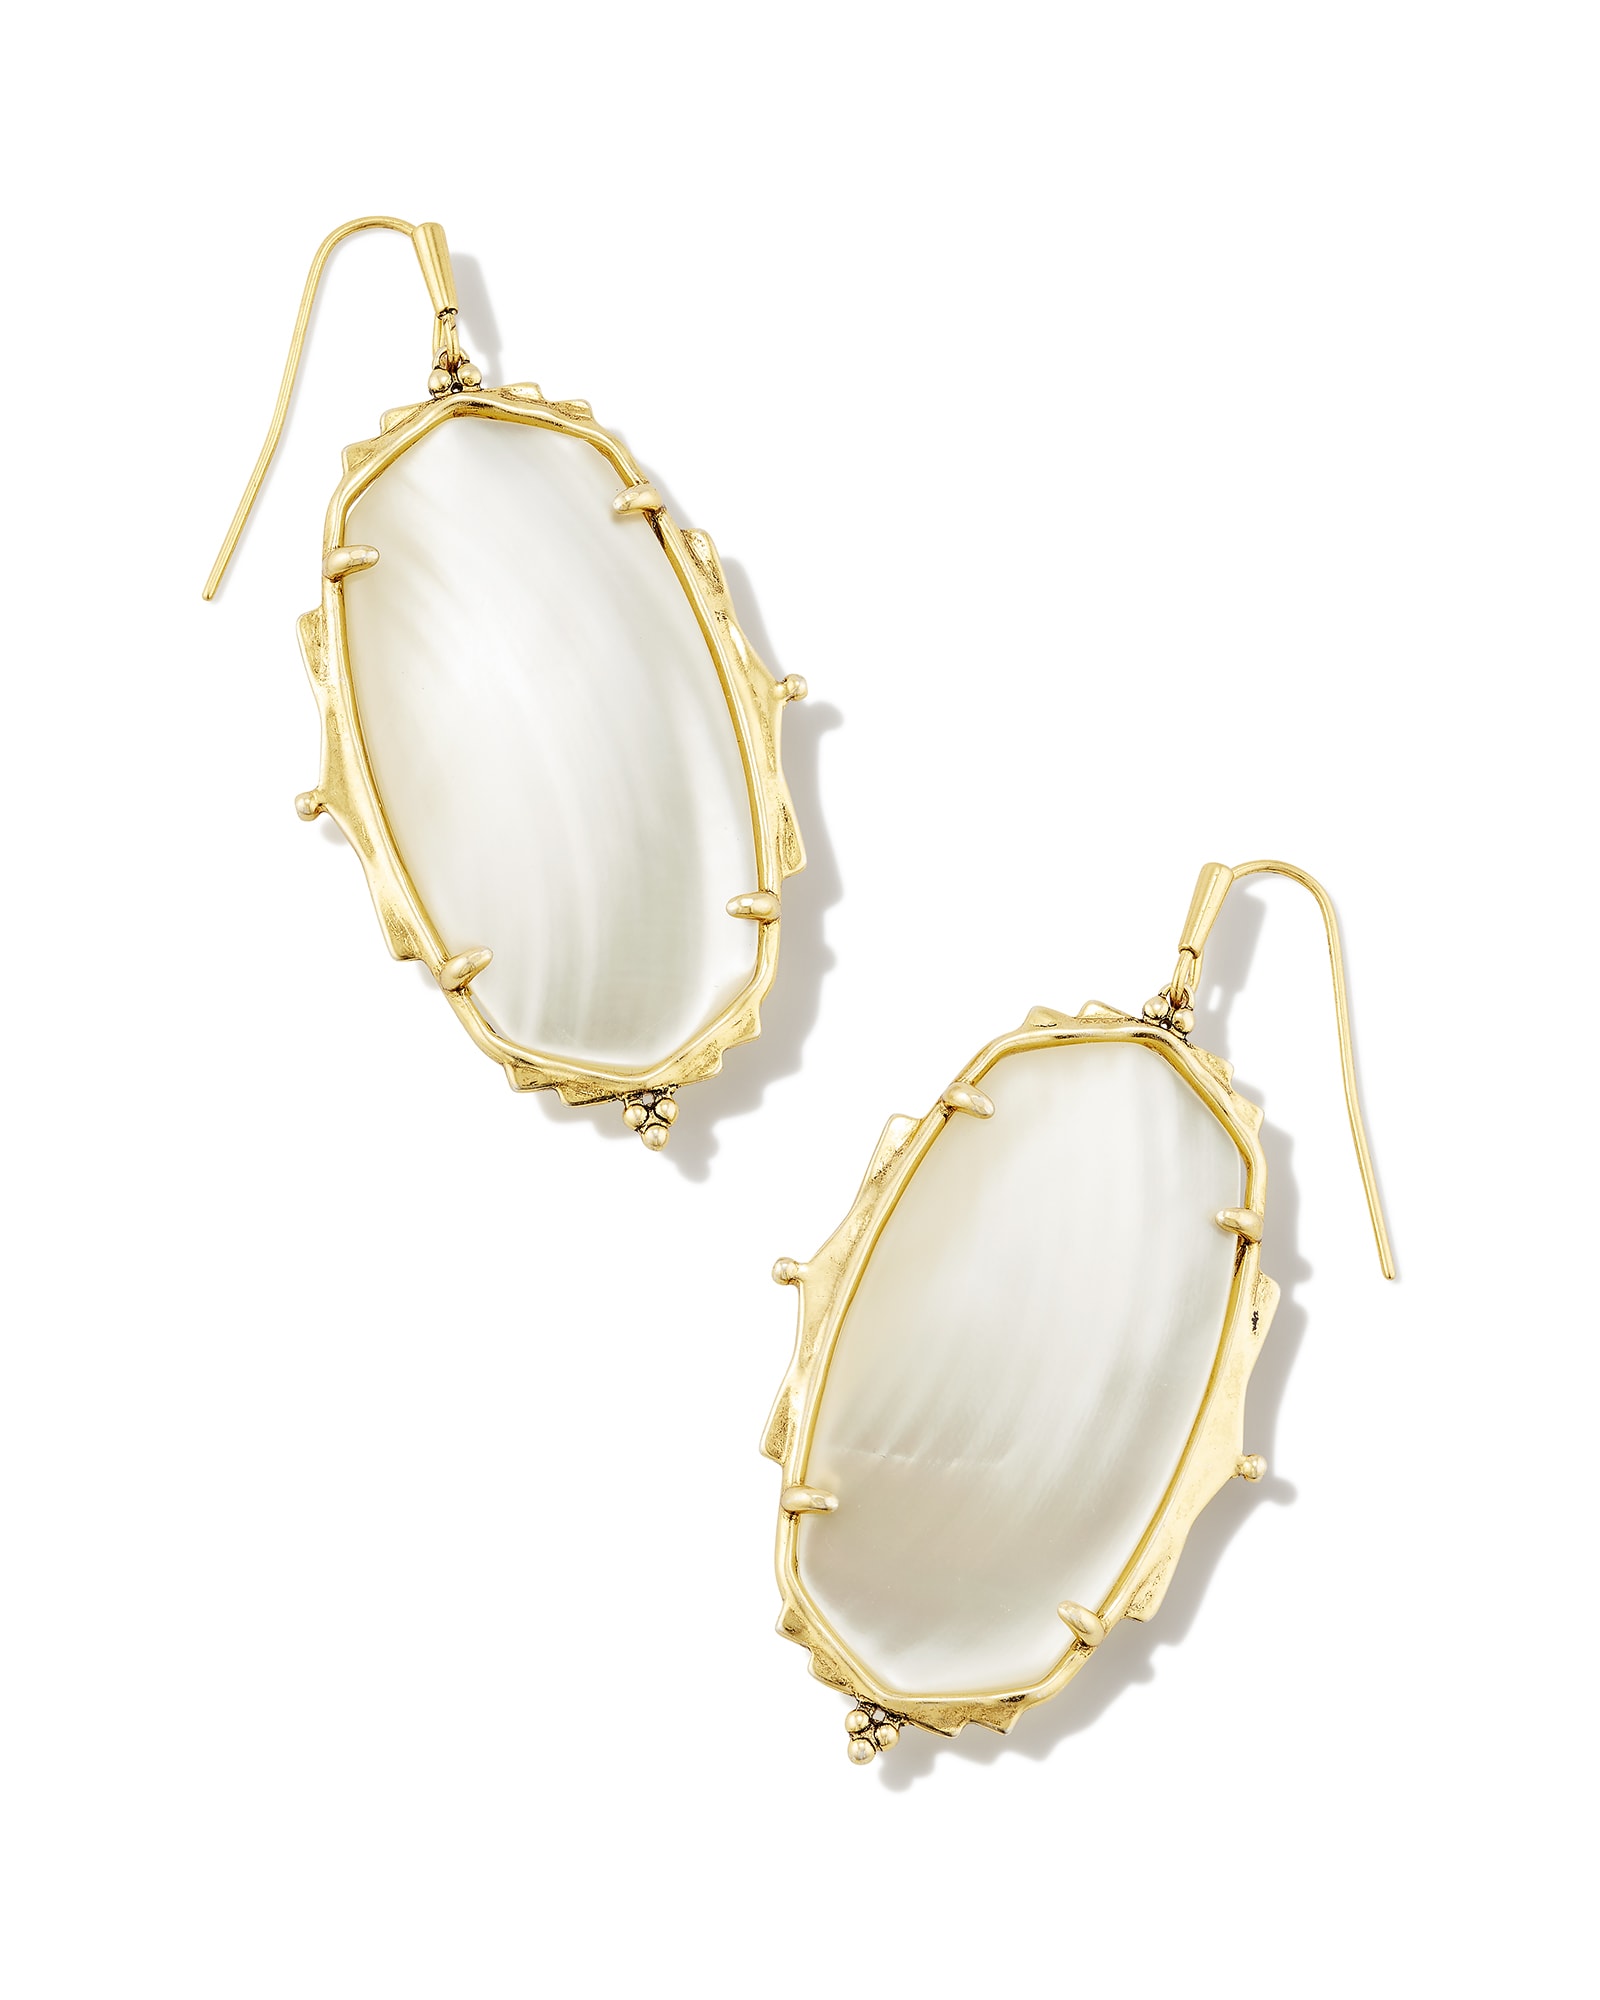 Kendra Scott Baroque Vintage Gold Ella Drop Earrings in Natural Mother-of-Pearl | Mother Of Pearl